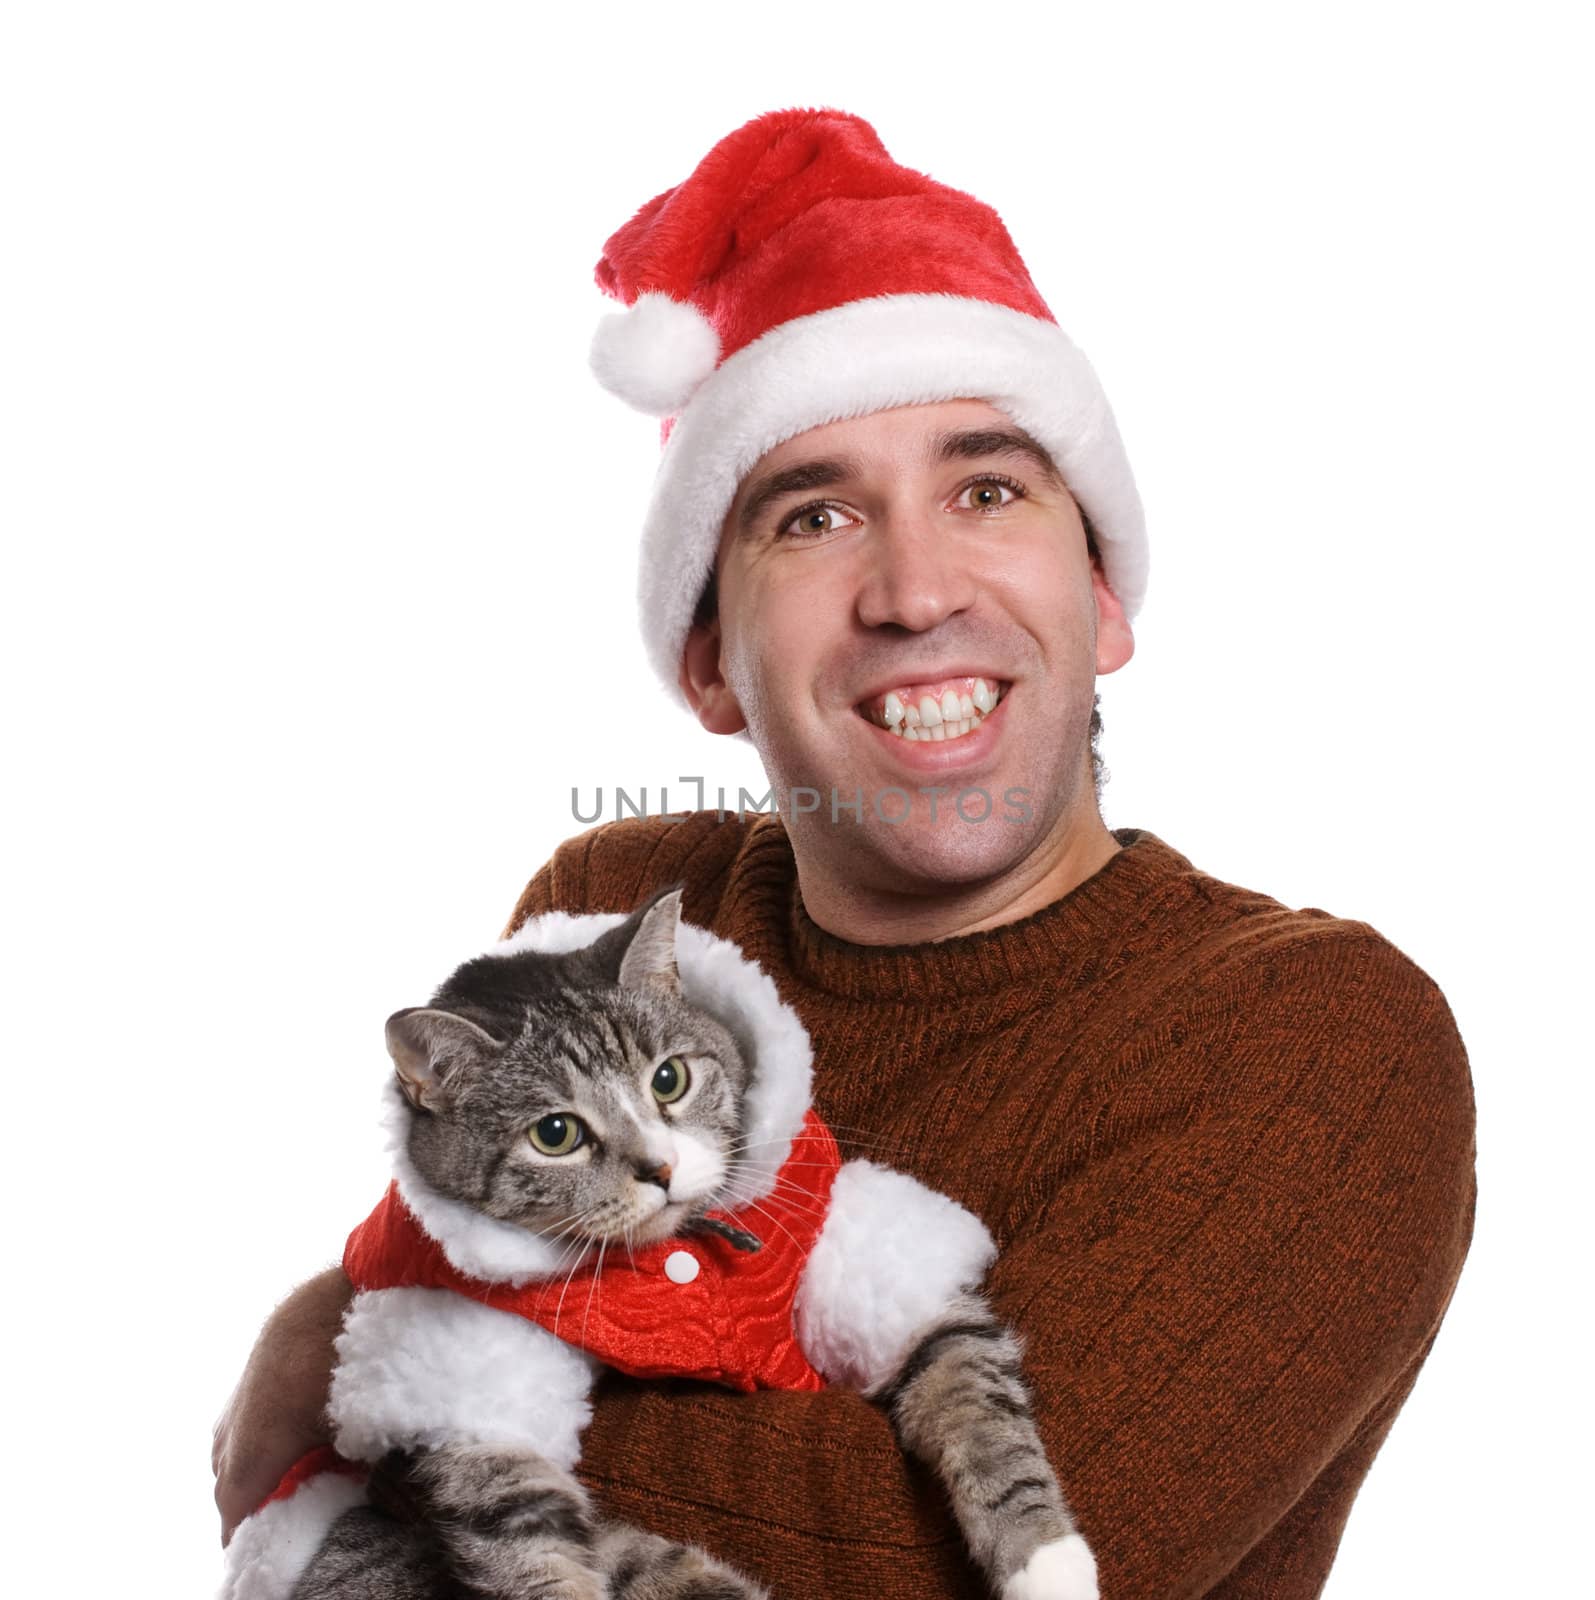 A smiling young man wearing a santa hat and holding his cat, isolated against a white background